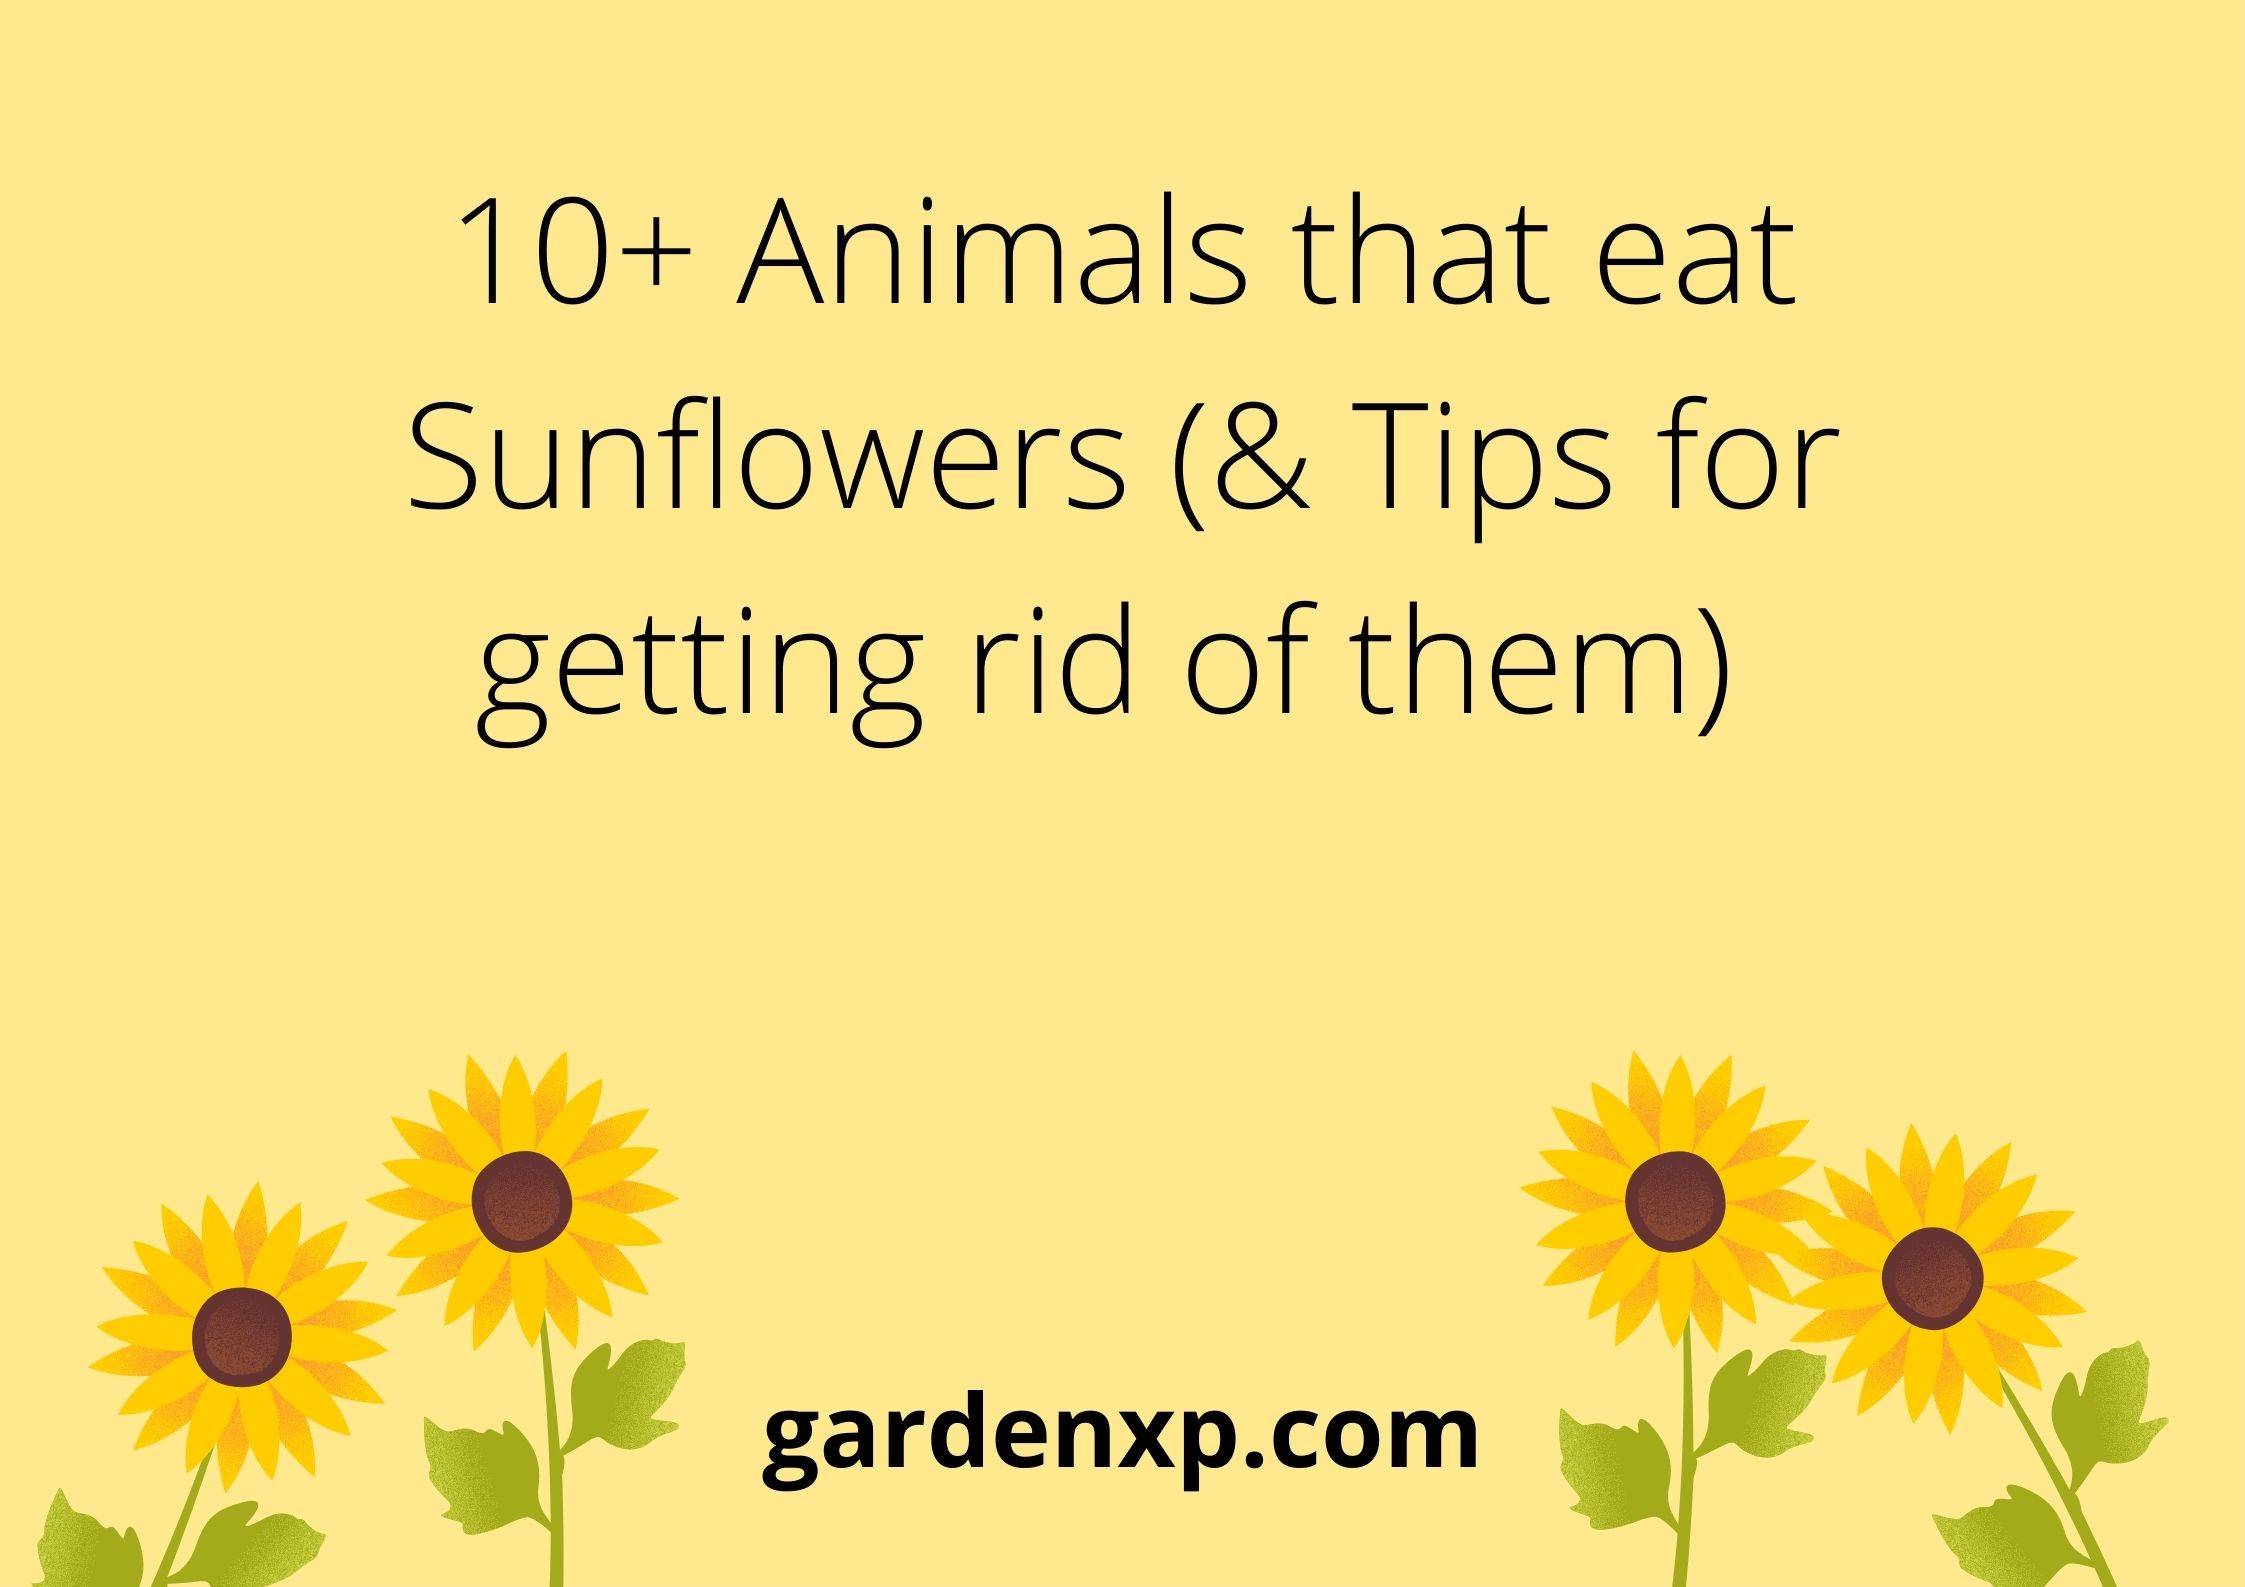 10+ Animals that eat Sunflowers (& Tips for getting rid of them) 